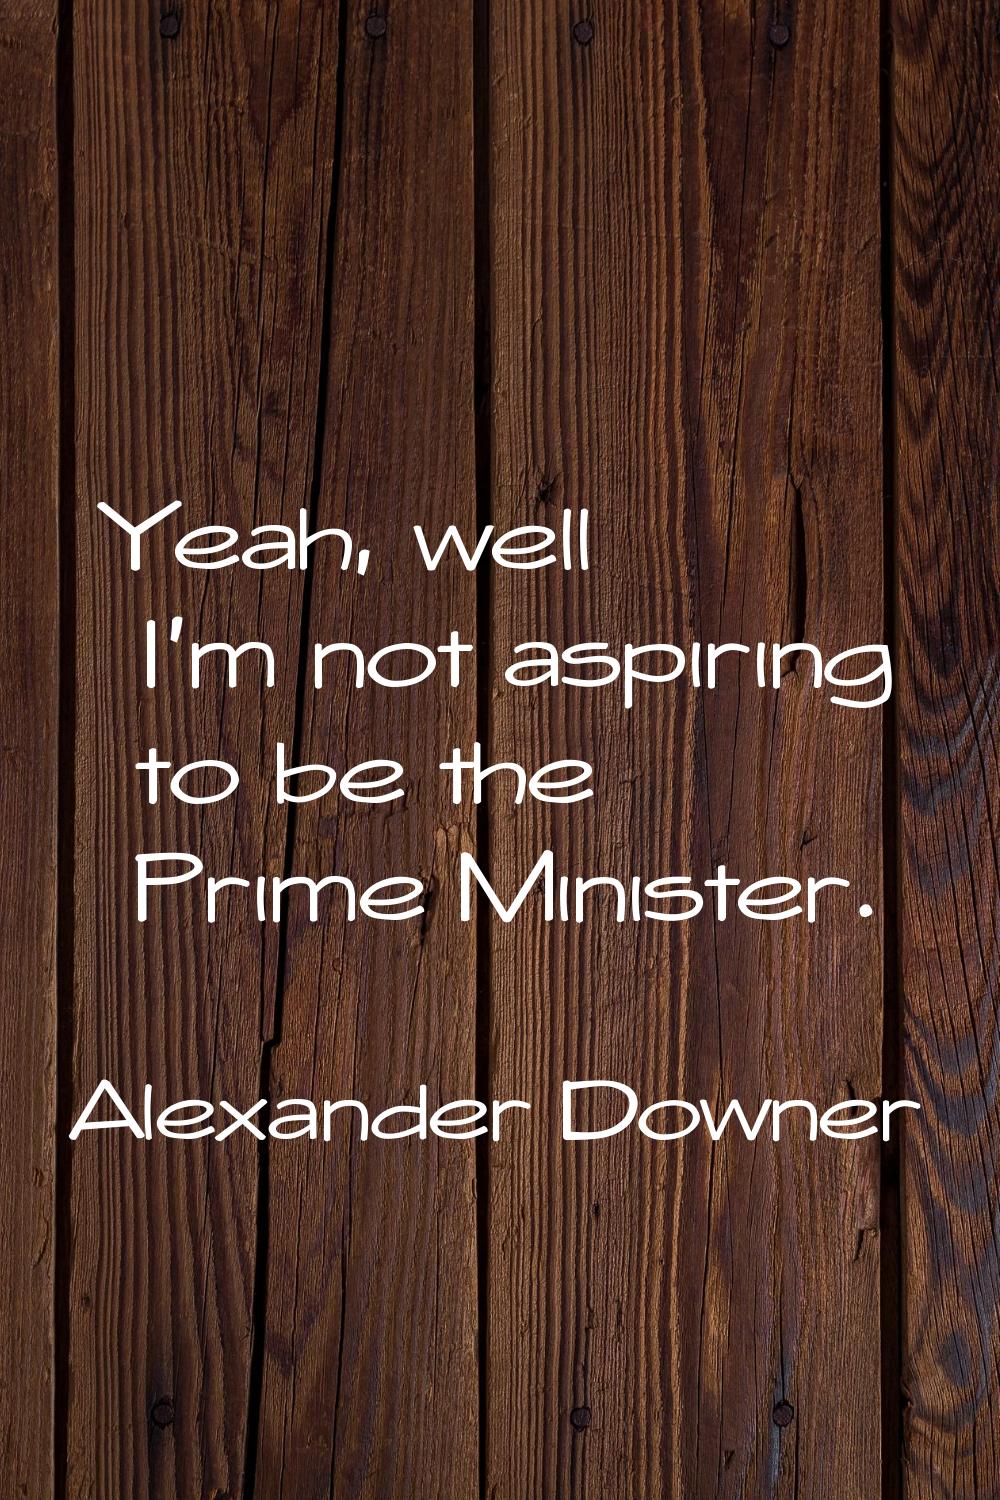 Yeah, well I'm not aspiring to be the Prime Minister.